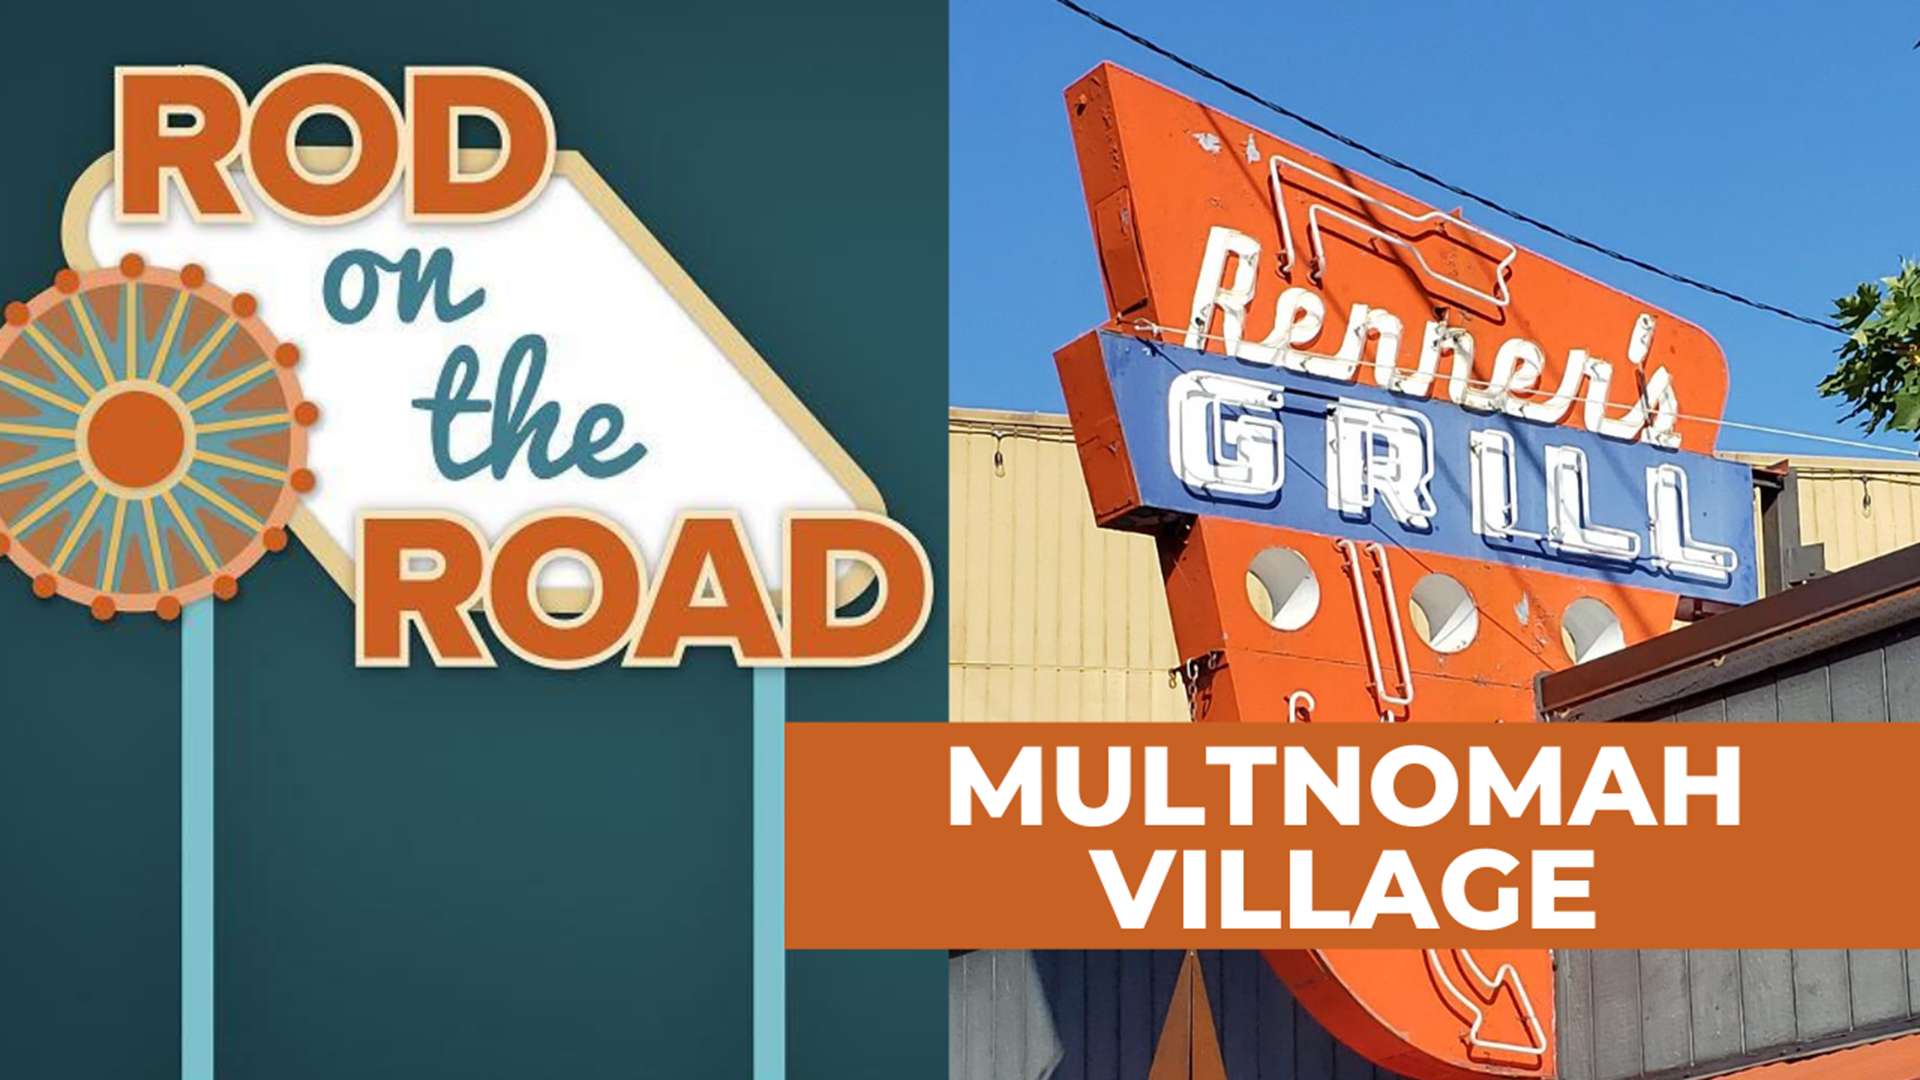 Rod stops by 'the village in the heart of Portland' and meets the people that call it home.